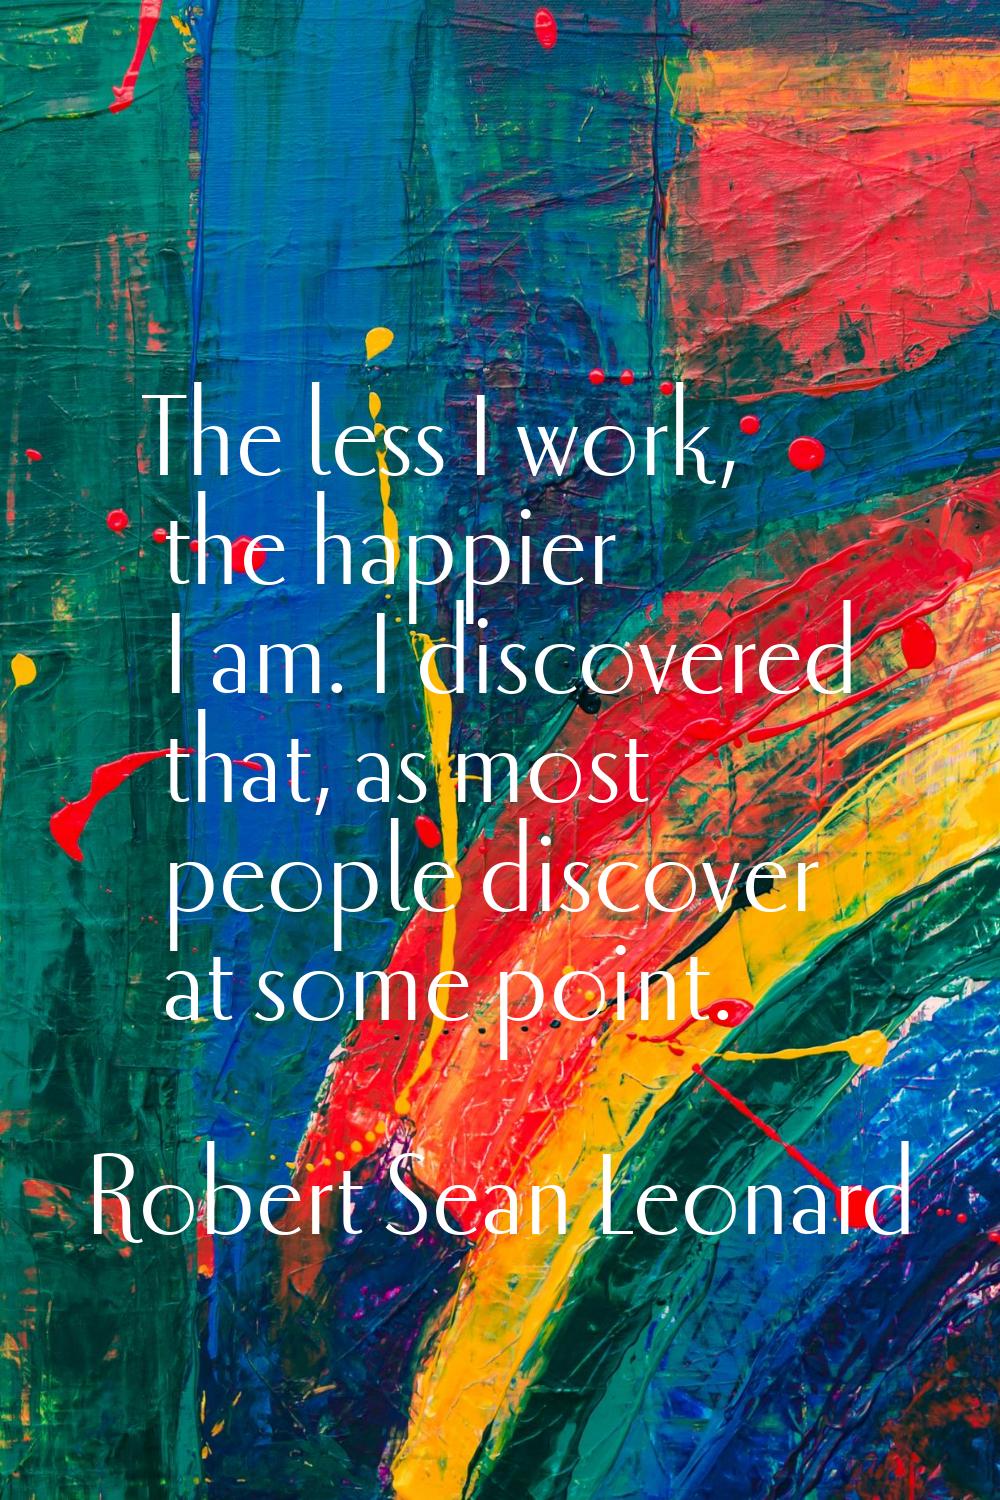 The less I work, the happier I am. I discovered that, as most people discover at some point.